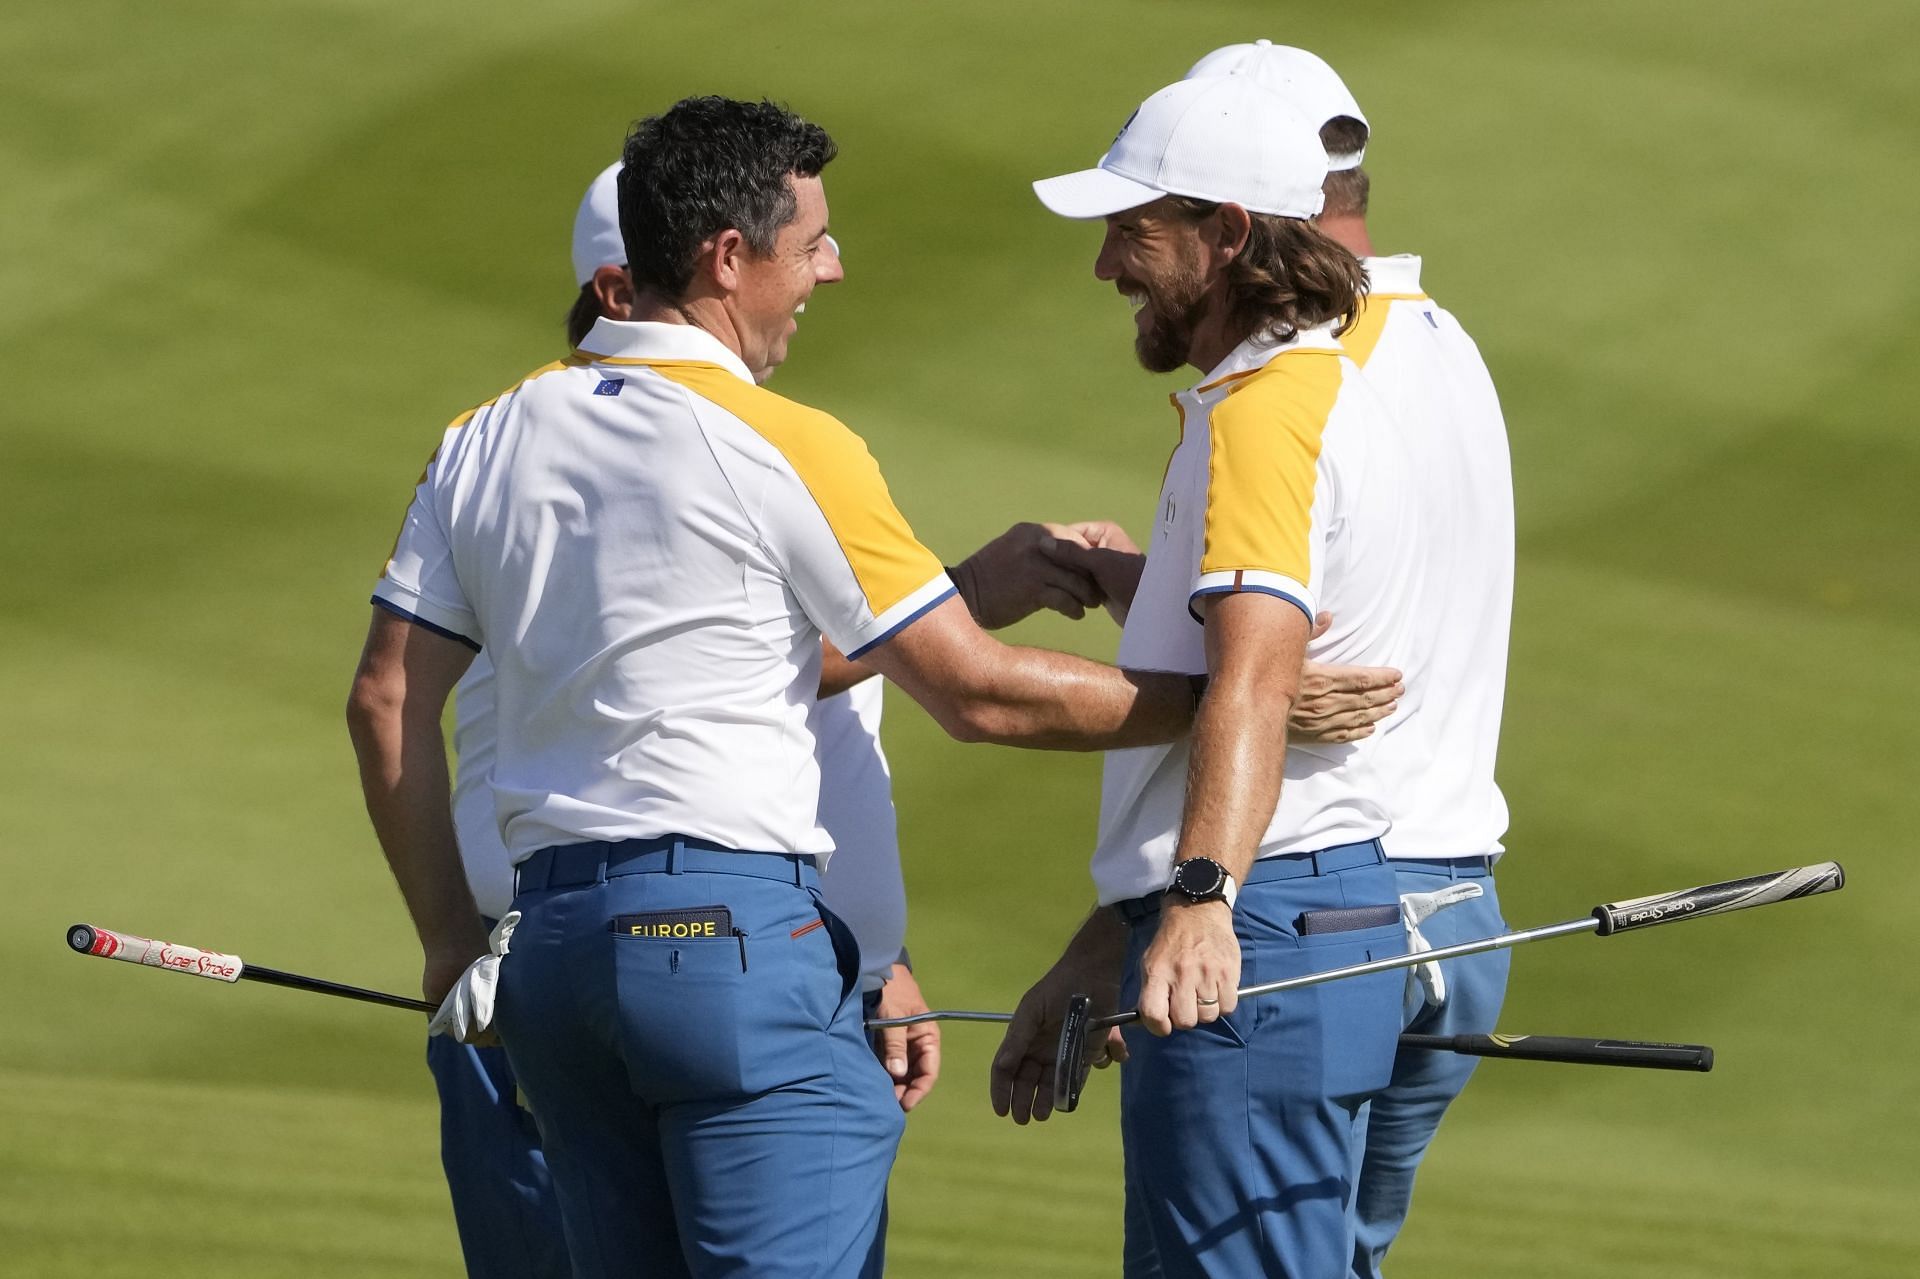 Rory McIlroy and Tommy Fleetwood, one of the European duos for the 2023 Ryder Cup first day foursomes (Image via Getty).